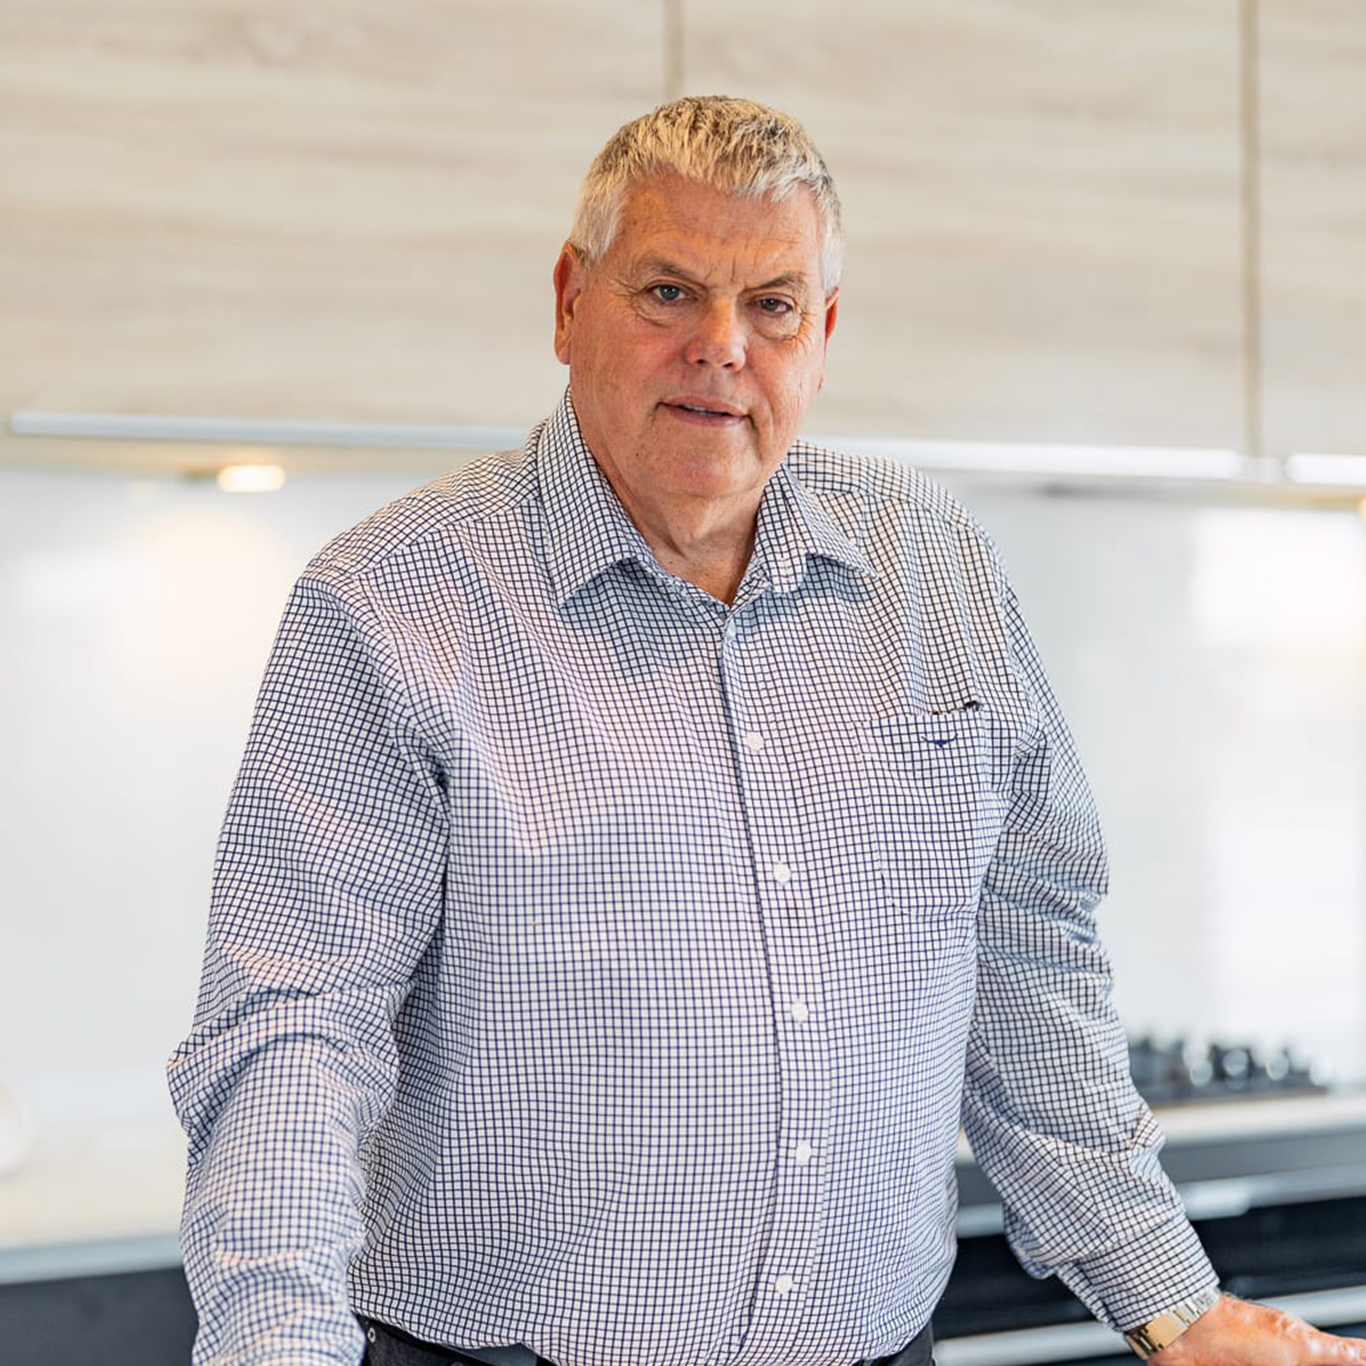 Trendsetter Homes Founder and Director Tony Anderson based in Christchurch